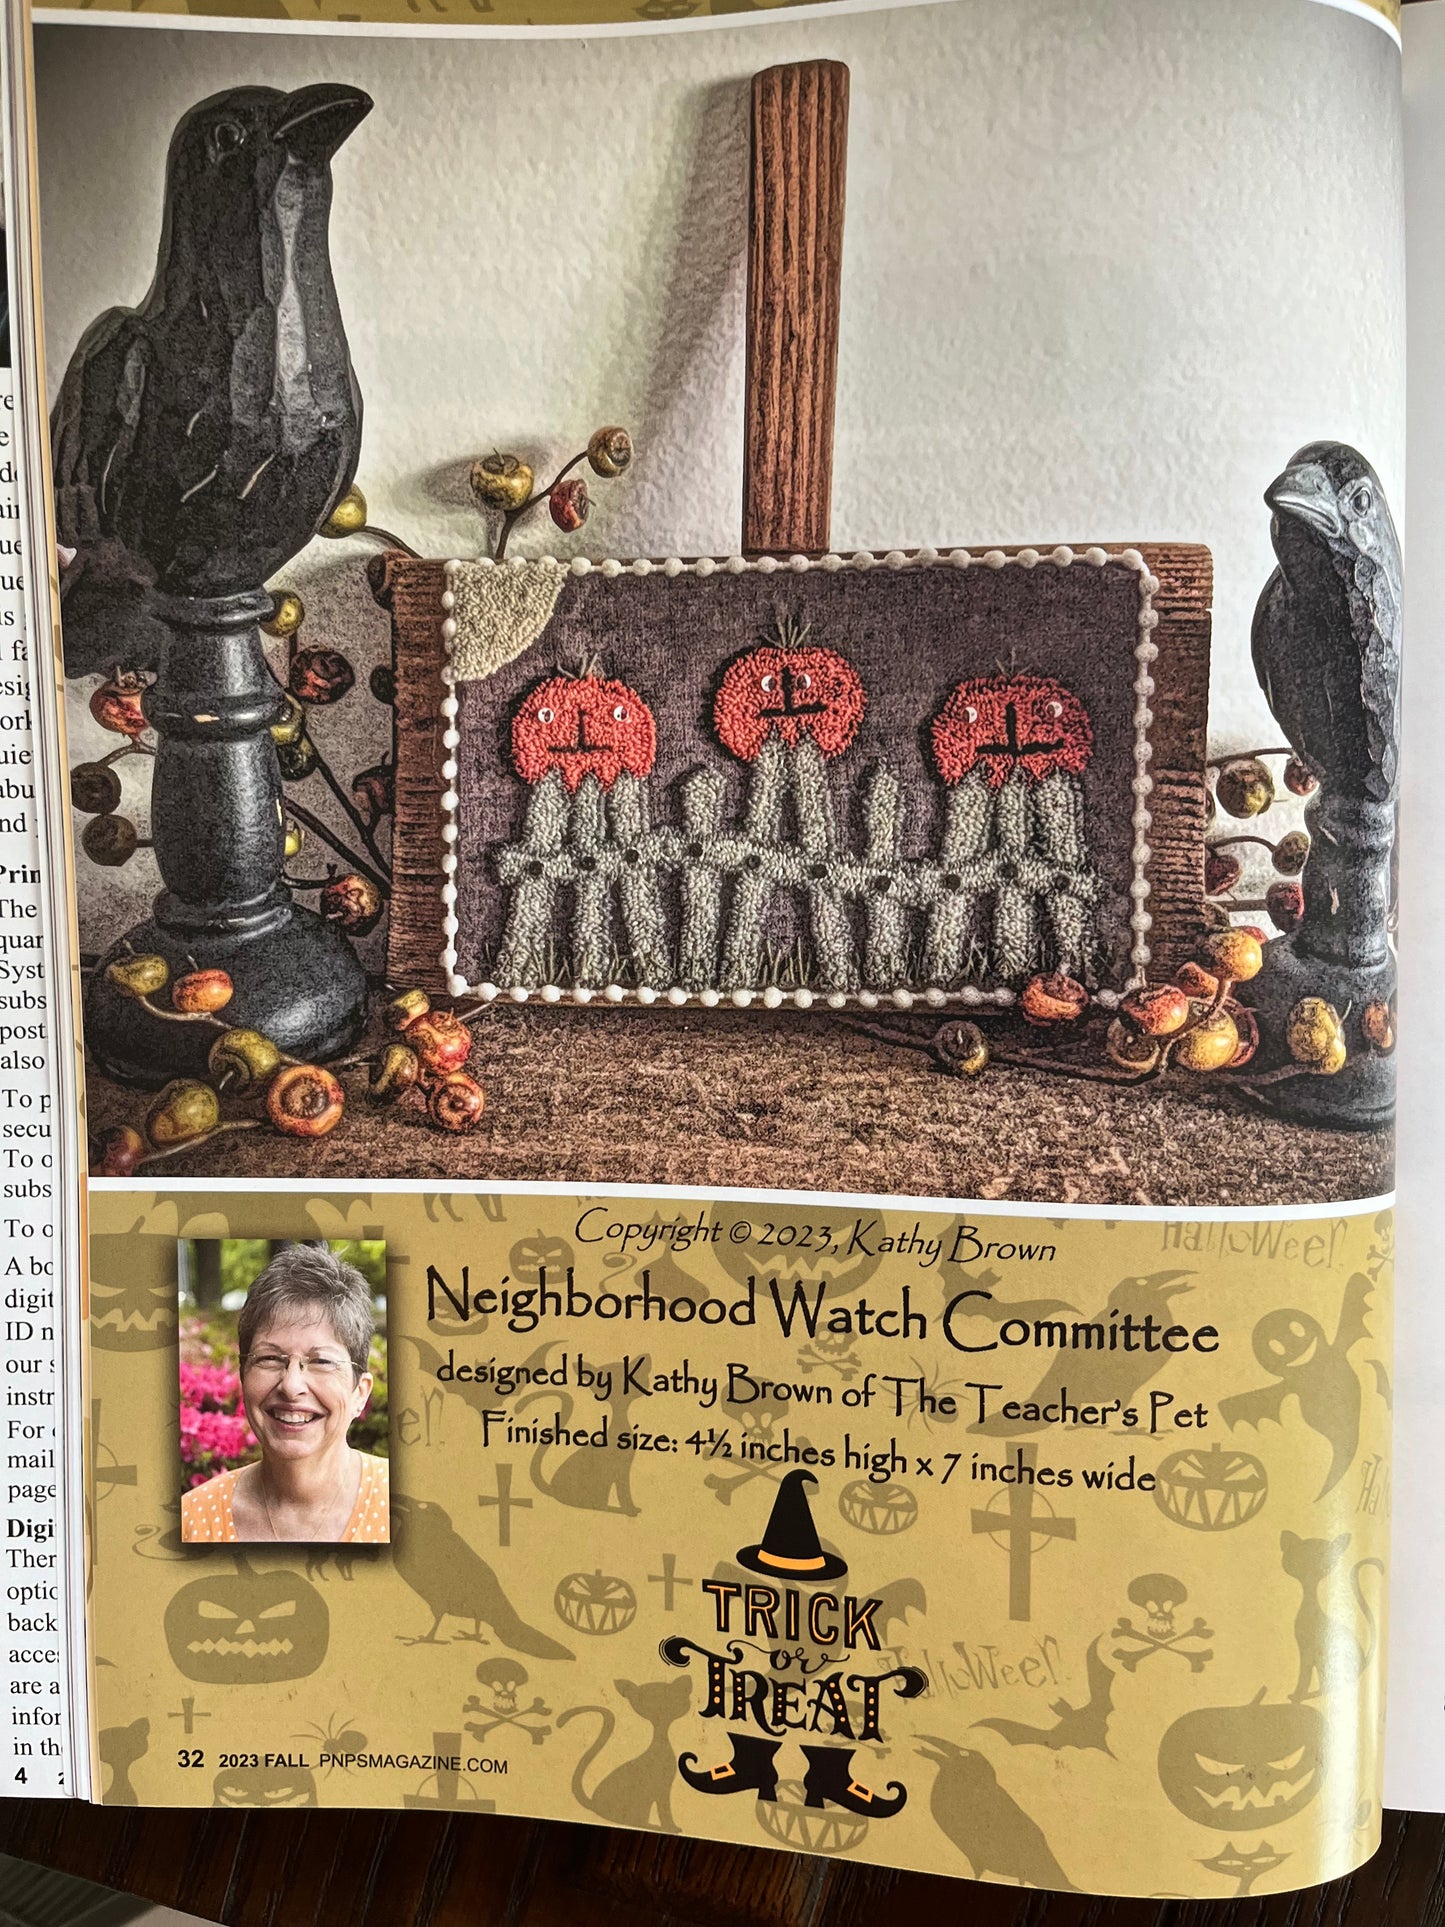 Punch Needle & Primitive Stitcher Magazine - Fall 2023 Issue - Now on SALE!